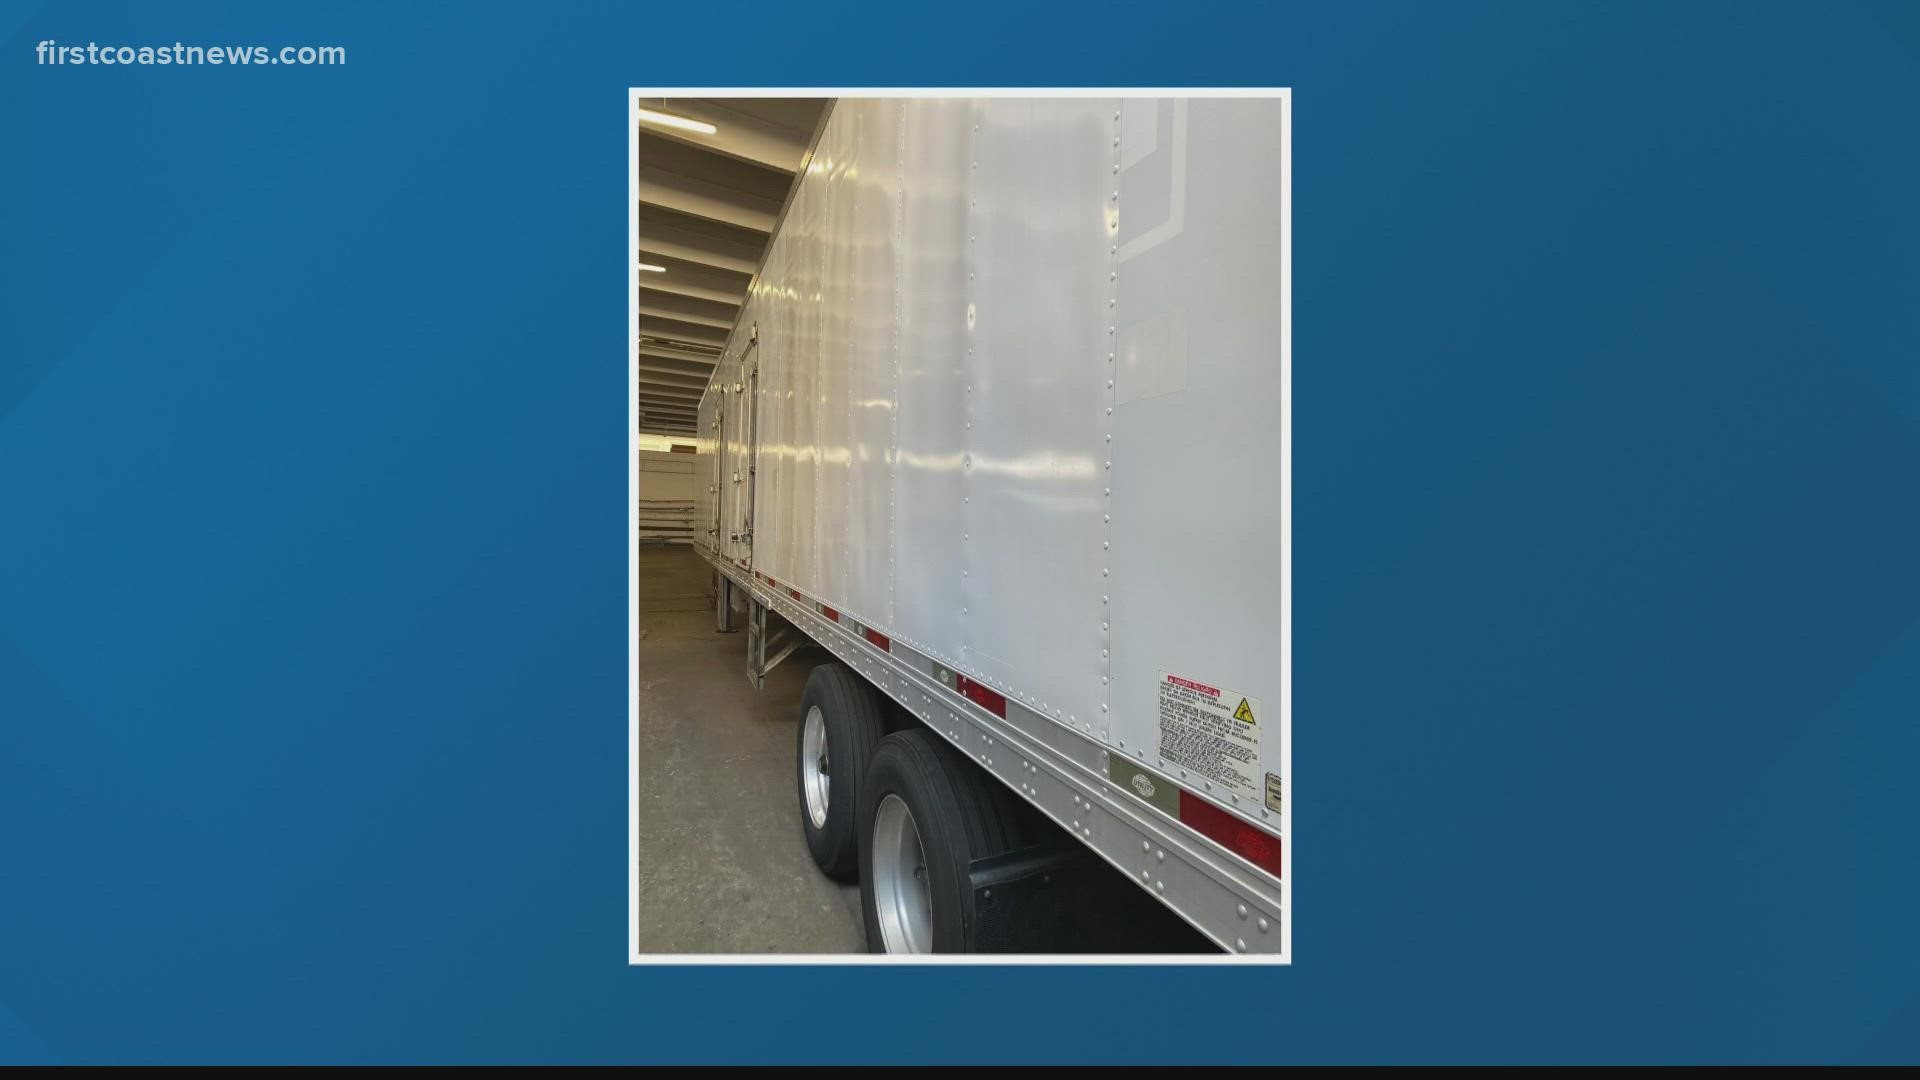 In a statement sent to First Coast News, Baptist said the refrigerated trailer will be used by its five-hospital health system if needed.